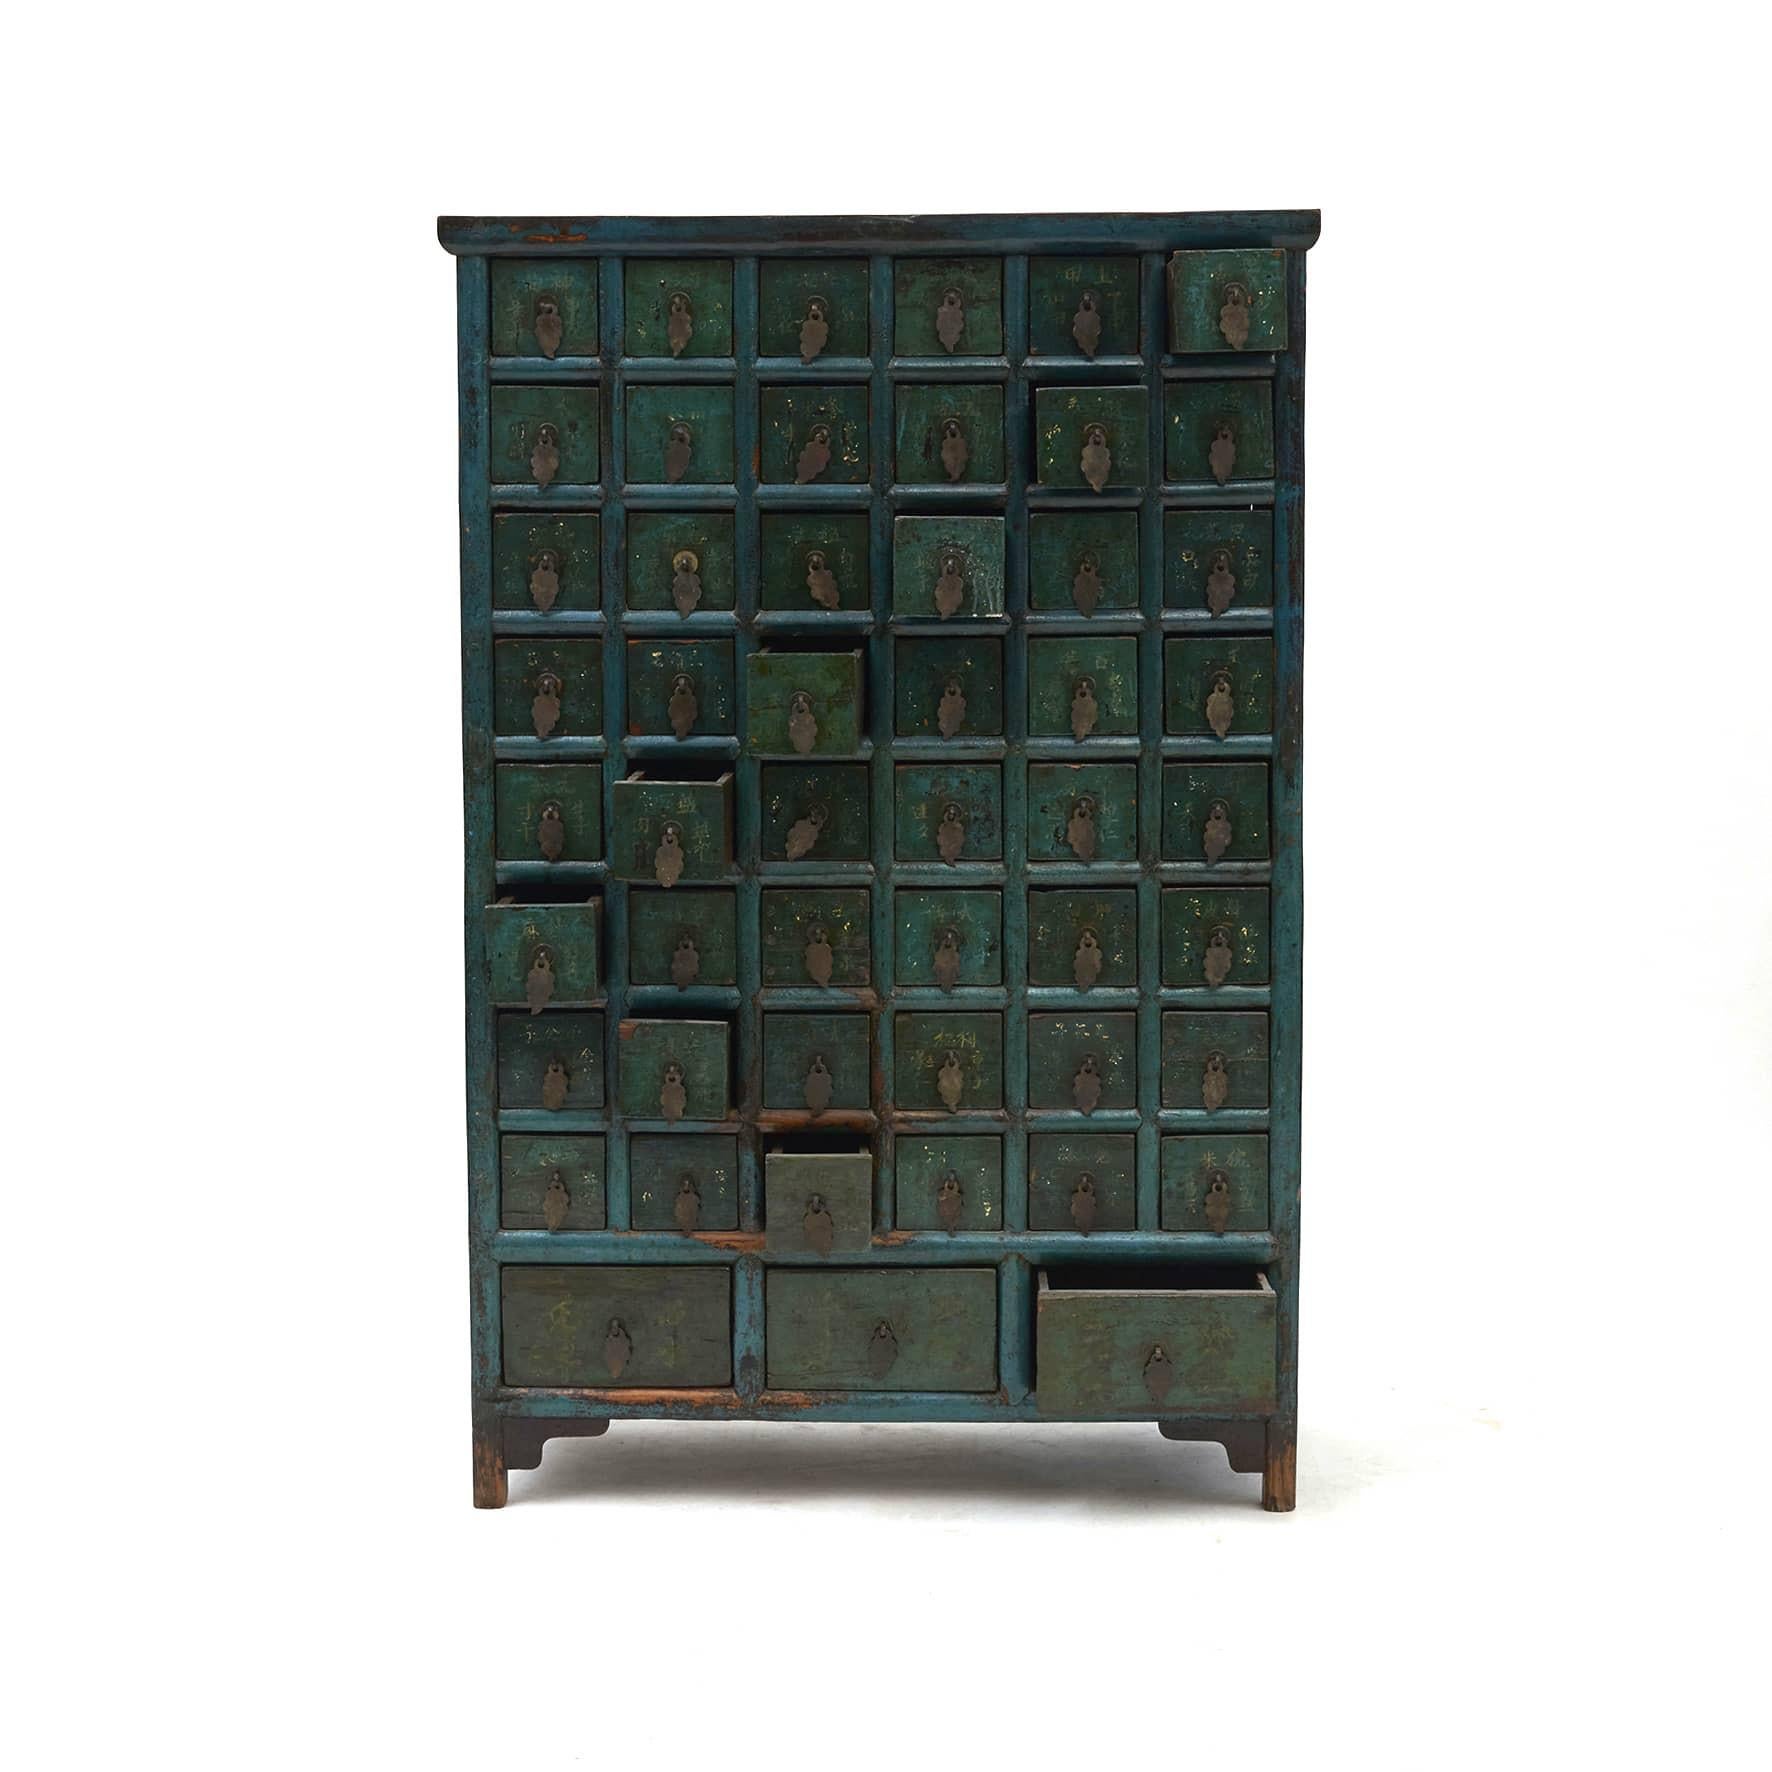 A Chinese lacquered apothecary, circa 1840-1860.
Elm wood with original lacquer. The front with green and petrol blue lacquer, sides and top with black lacquer.
With 51 drawers each with Chinese script for herbs, minerals and natural remedies.
In